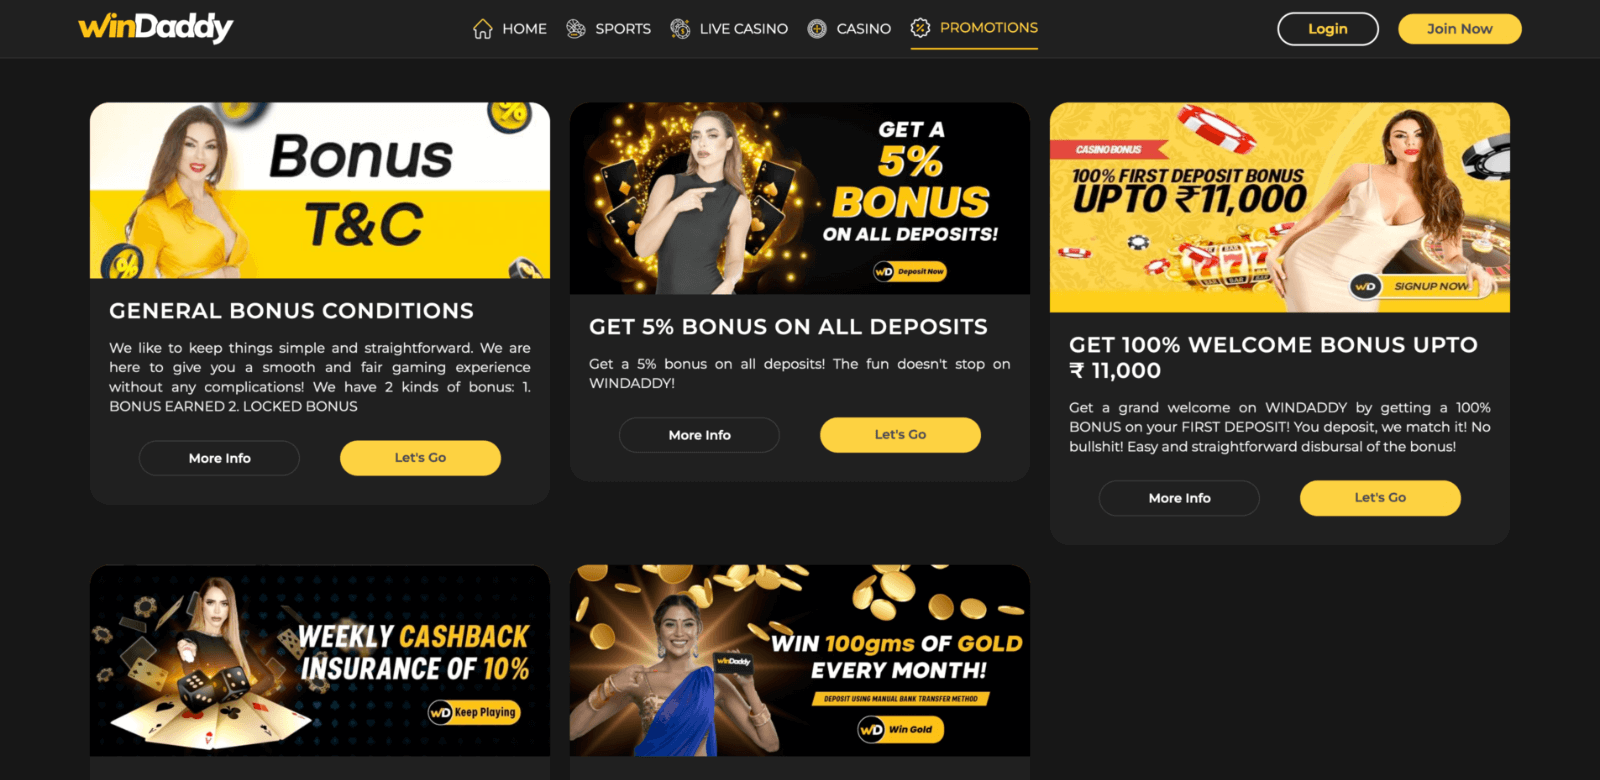 Page with current promotions and bonus offers from WinDaddy